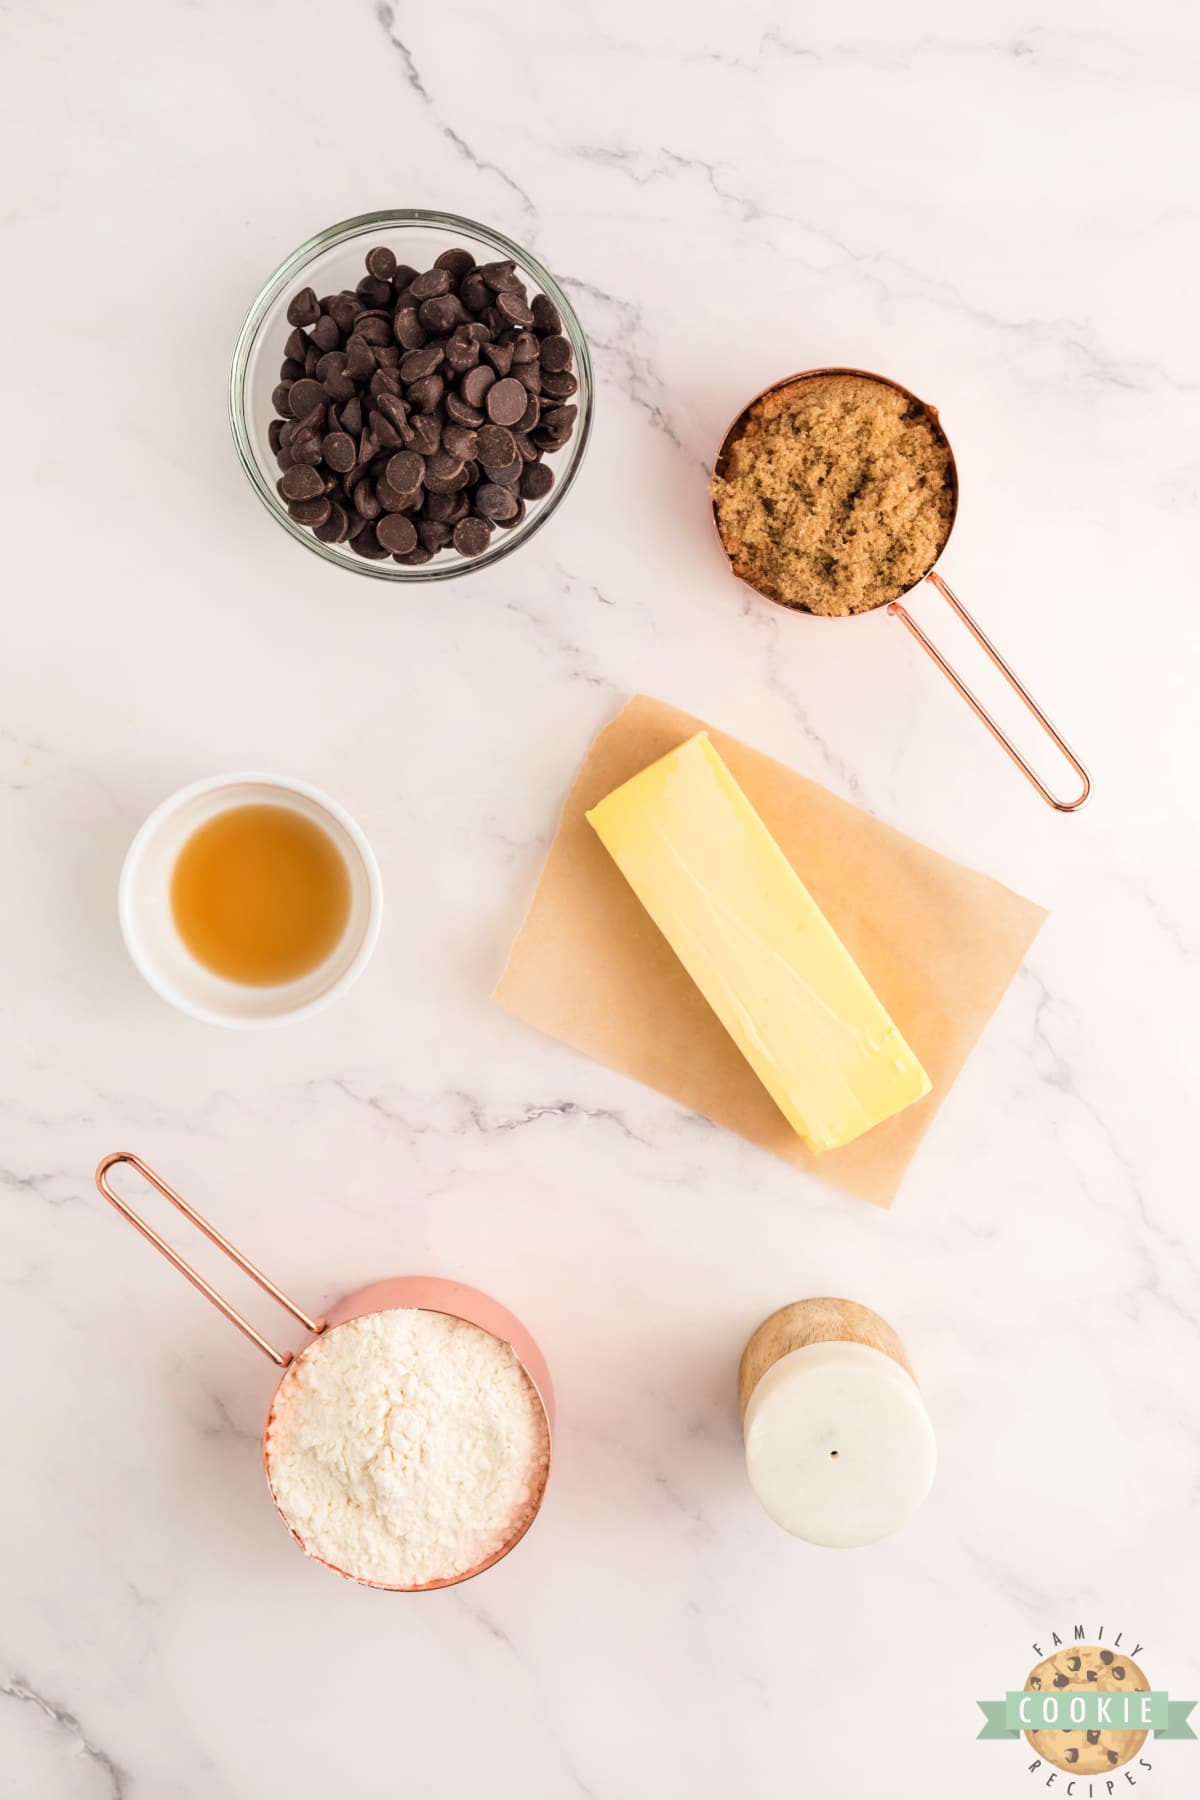 Ingredients in Chocolate Chip Cookie Dough Bites.